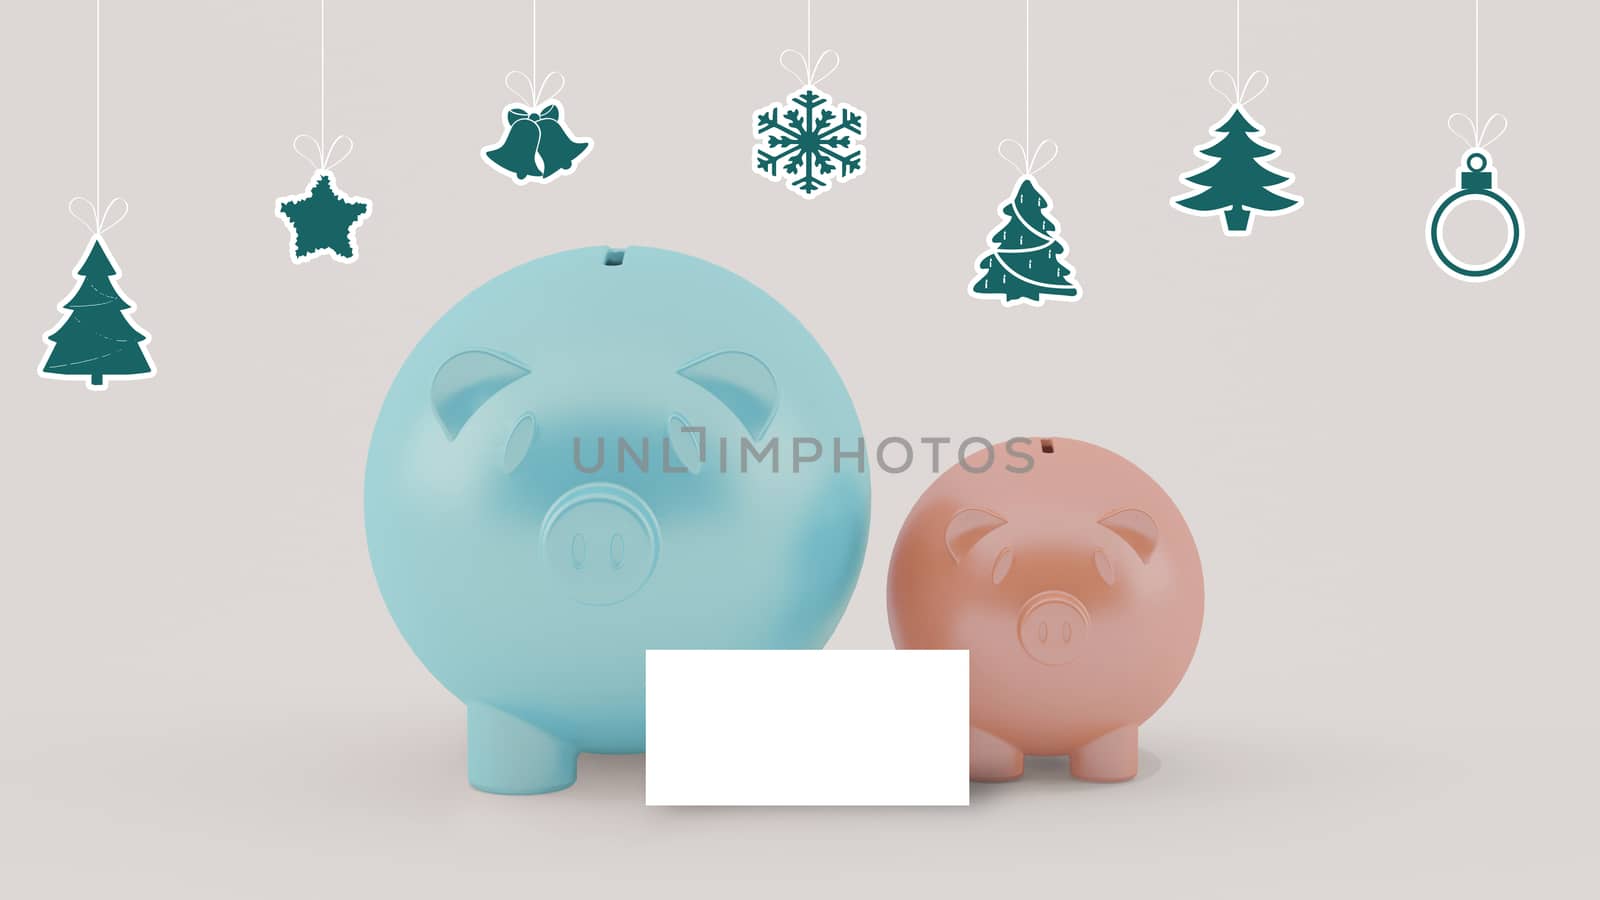 using piggy money on christmas celebration with blank card at center